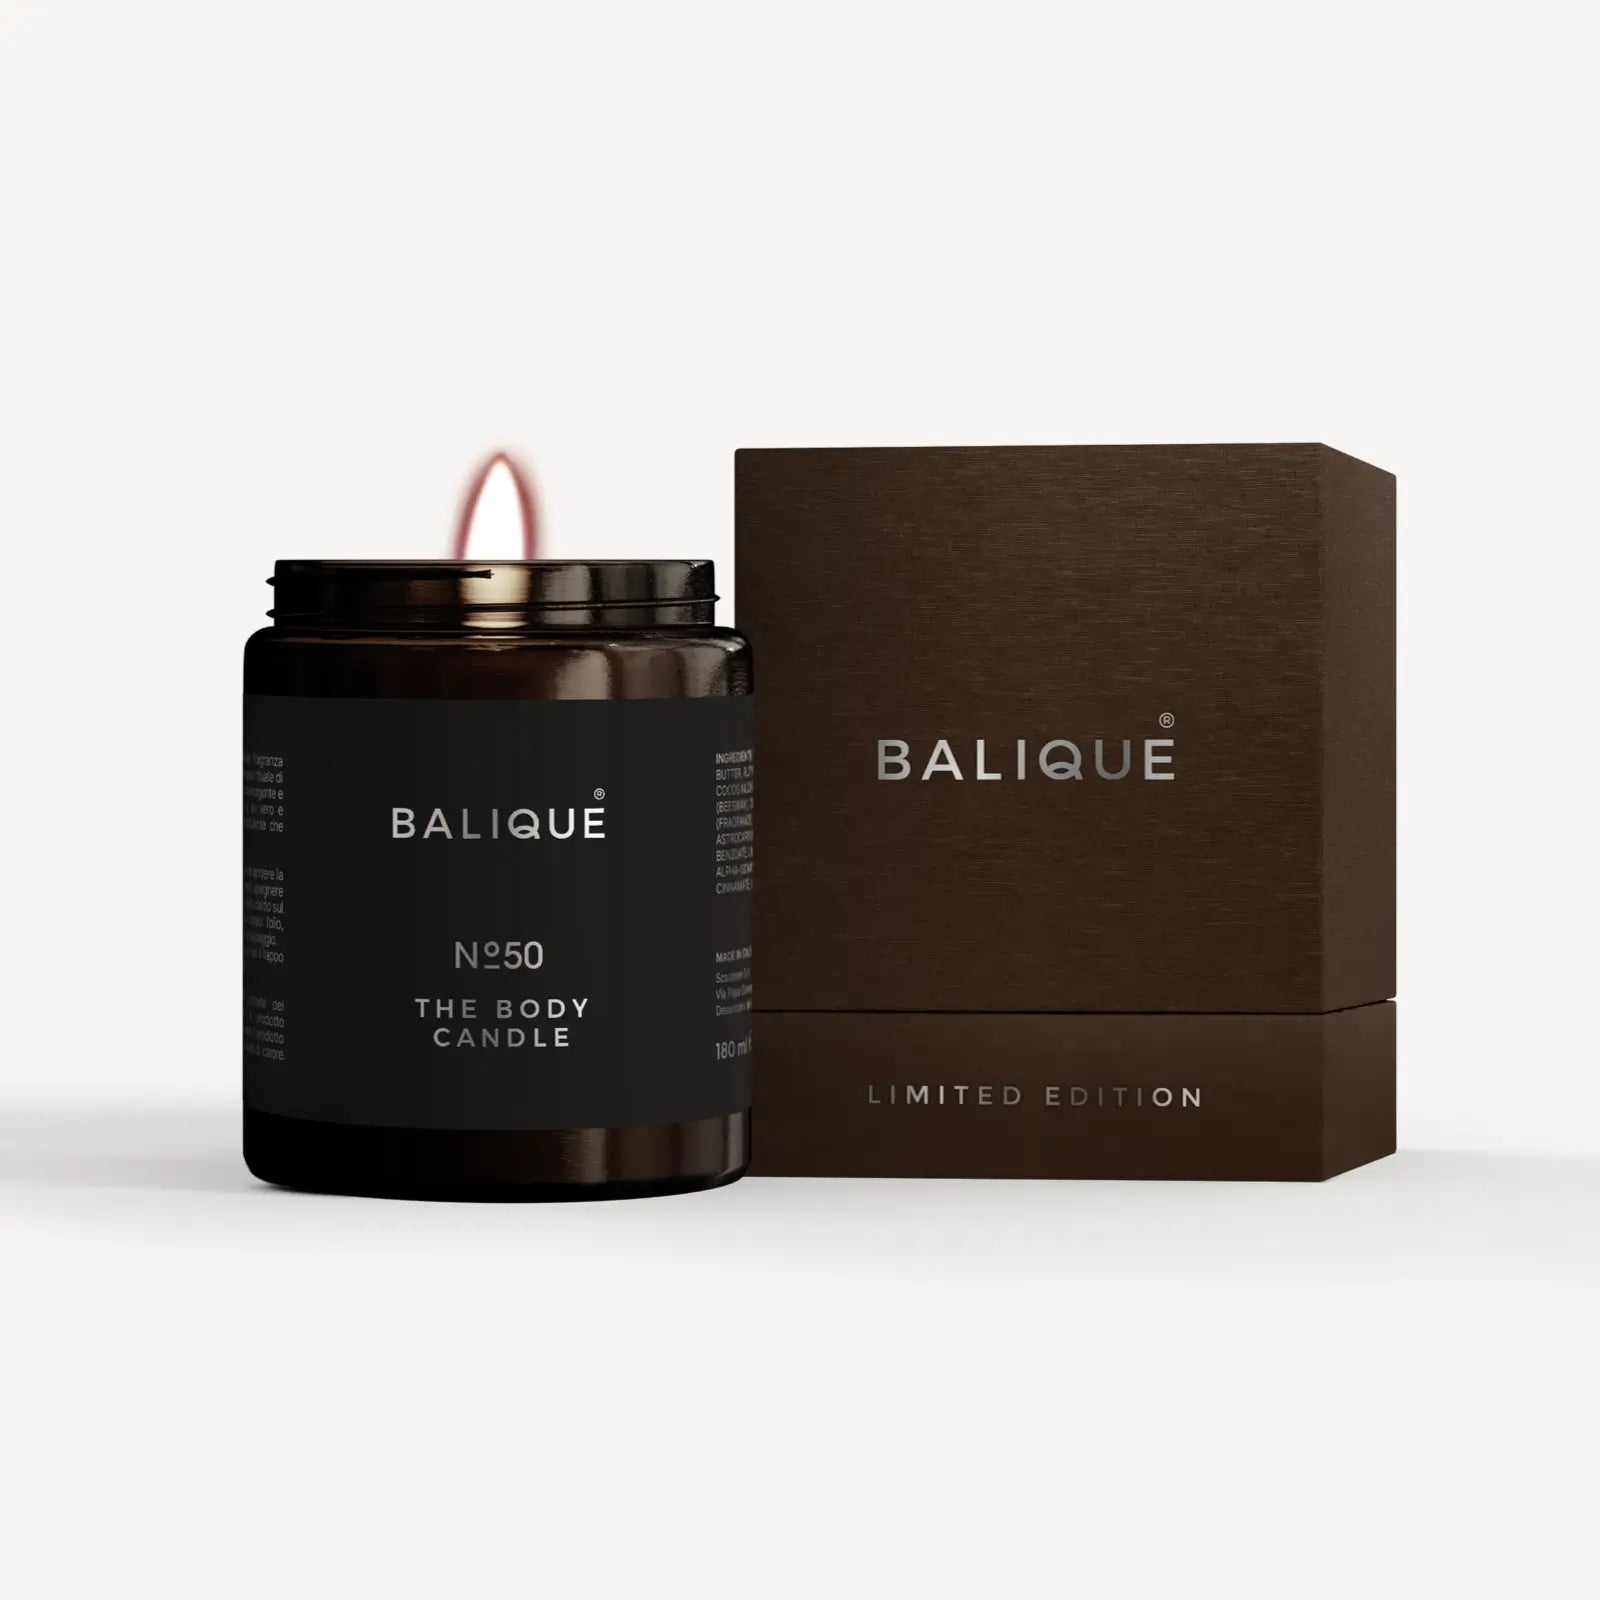 N°50 THE BODY CANDLE -  LIMITED EDITION 180ml